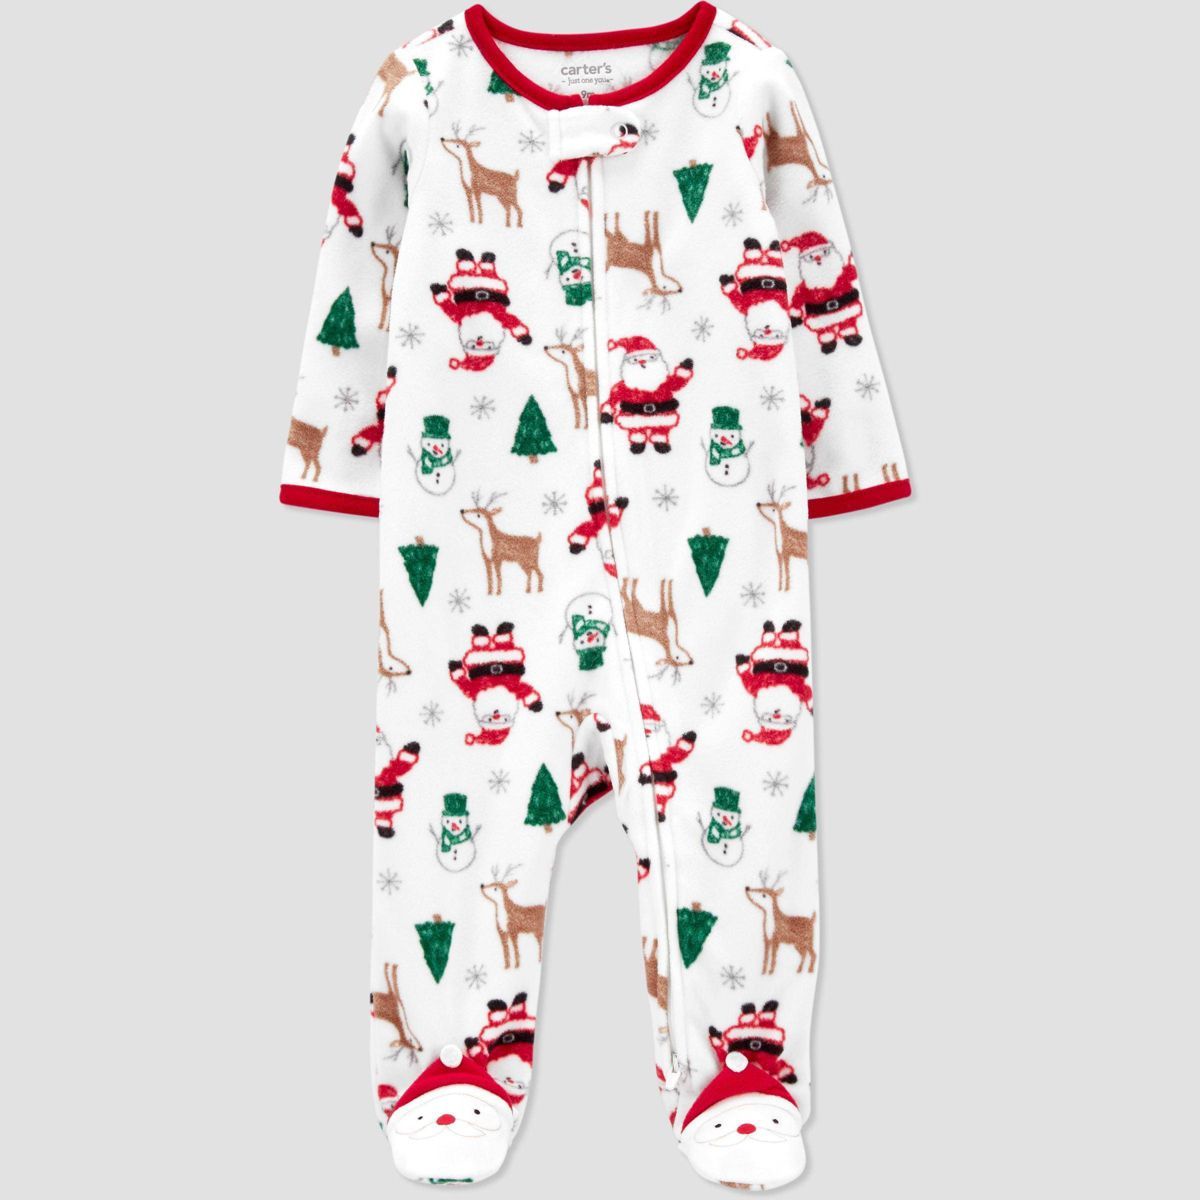 Carter's Just One You®️ Baby Santa Christmas Footed Pajama - White | Target